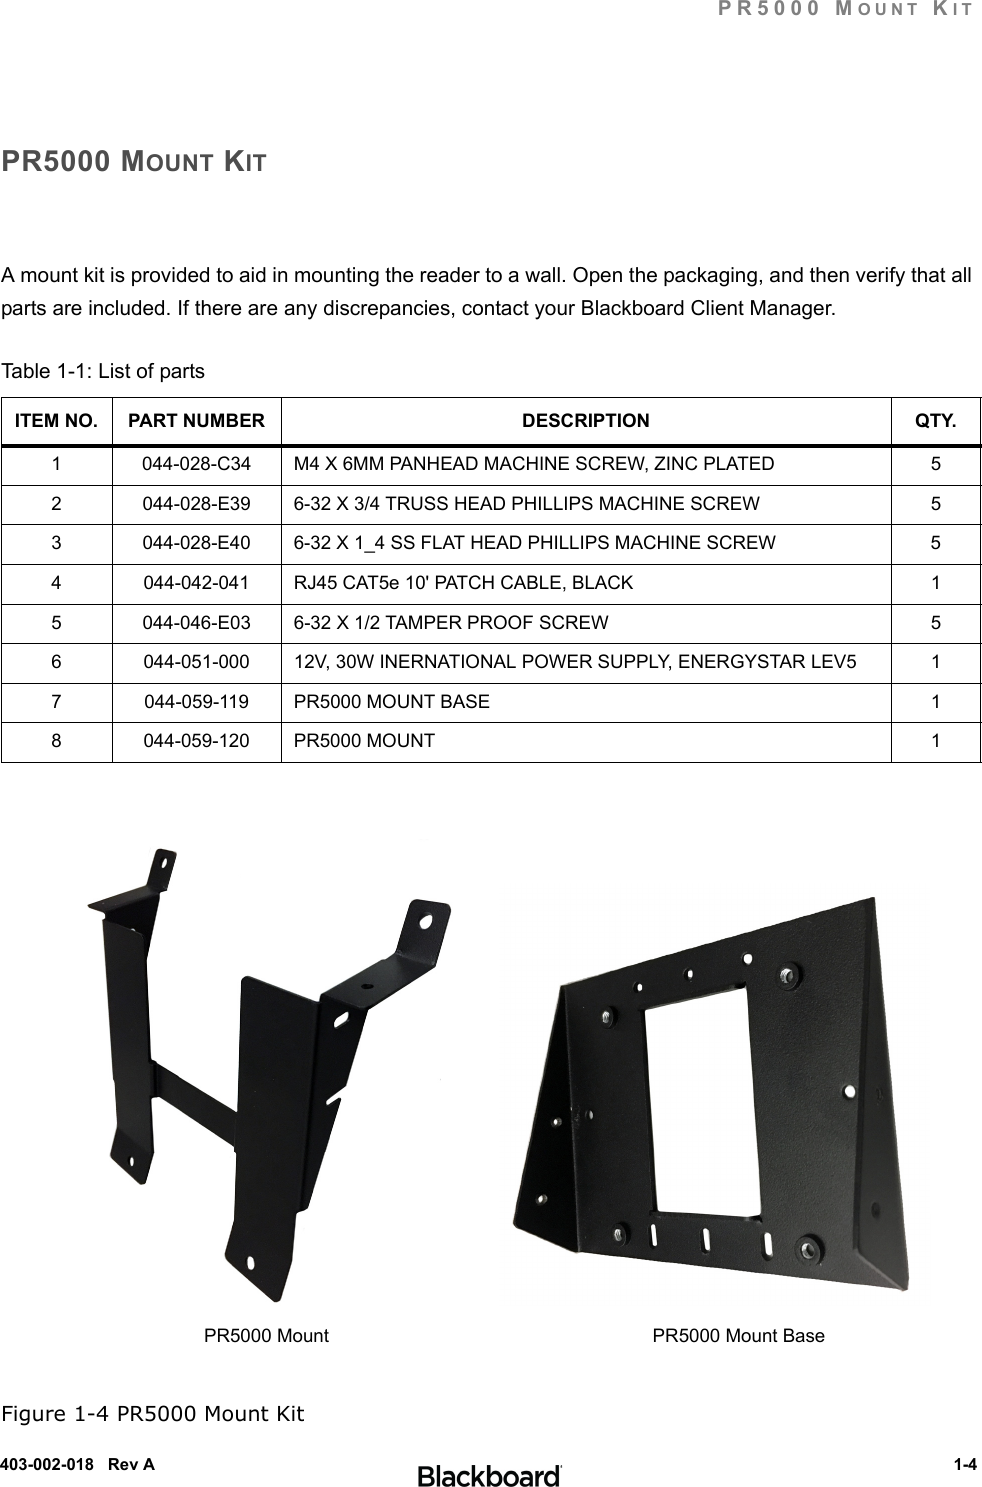 PR5000 MOUNT KIT 1-4403-002-018   Rev APR5000 MOUNT KITA mount kit is provided to aid in mounting the reader to a wall. Open the packaging, and then verify that all parts are included. If there are any discrepancies, contact your Blackboard Client Manager.Figure 1-4 PR5000 Mount KitTable 1-1: List of partsITEM NO. PART NUMBER DESCRIPTION QTY.1 044-028-C34 M4 X 6MM PANHEAD MACHINE SCREW, ZINC PLATED 52 044-028-E39 6-32 X 3/4 TRUSS HEAD PHILLIPS MACHINE SCREW 53 044-028-E40 6-32 X 1_4 SS FLAT HEAD PHILLIPS MACHINE SCREW 54 044-042-041 RJ45 CAT5e 10&apos; PATCH CABLE, BLACK 15 044-046-E03 6-32 X 1/2 TAMPER PROOF SCREW 56 044-051-000 12V, 30W INERNATIONAL POWER SUPPLY, ENERGYSTAR LEV5 17 044-059-119 PR5000 MOUNT BASE 18 044-059-120 PR5000 MOUNT 1PR5000 Mount PR5000 Mount Base